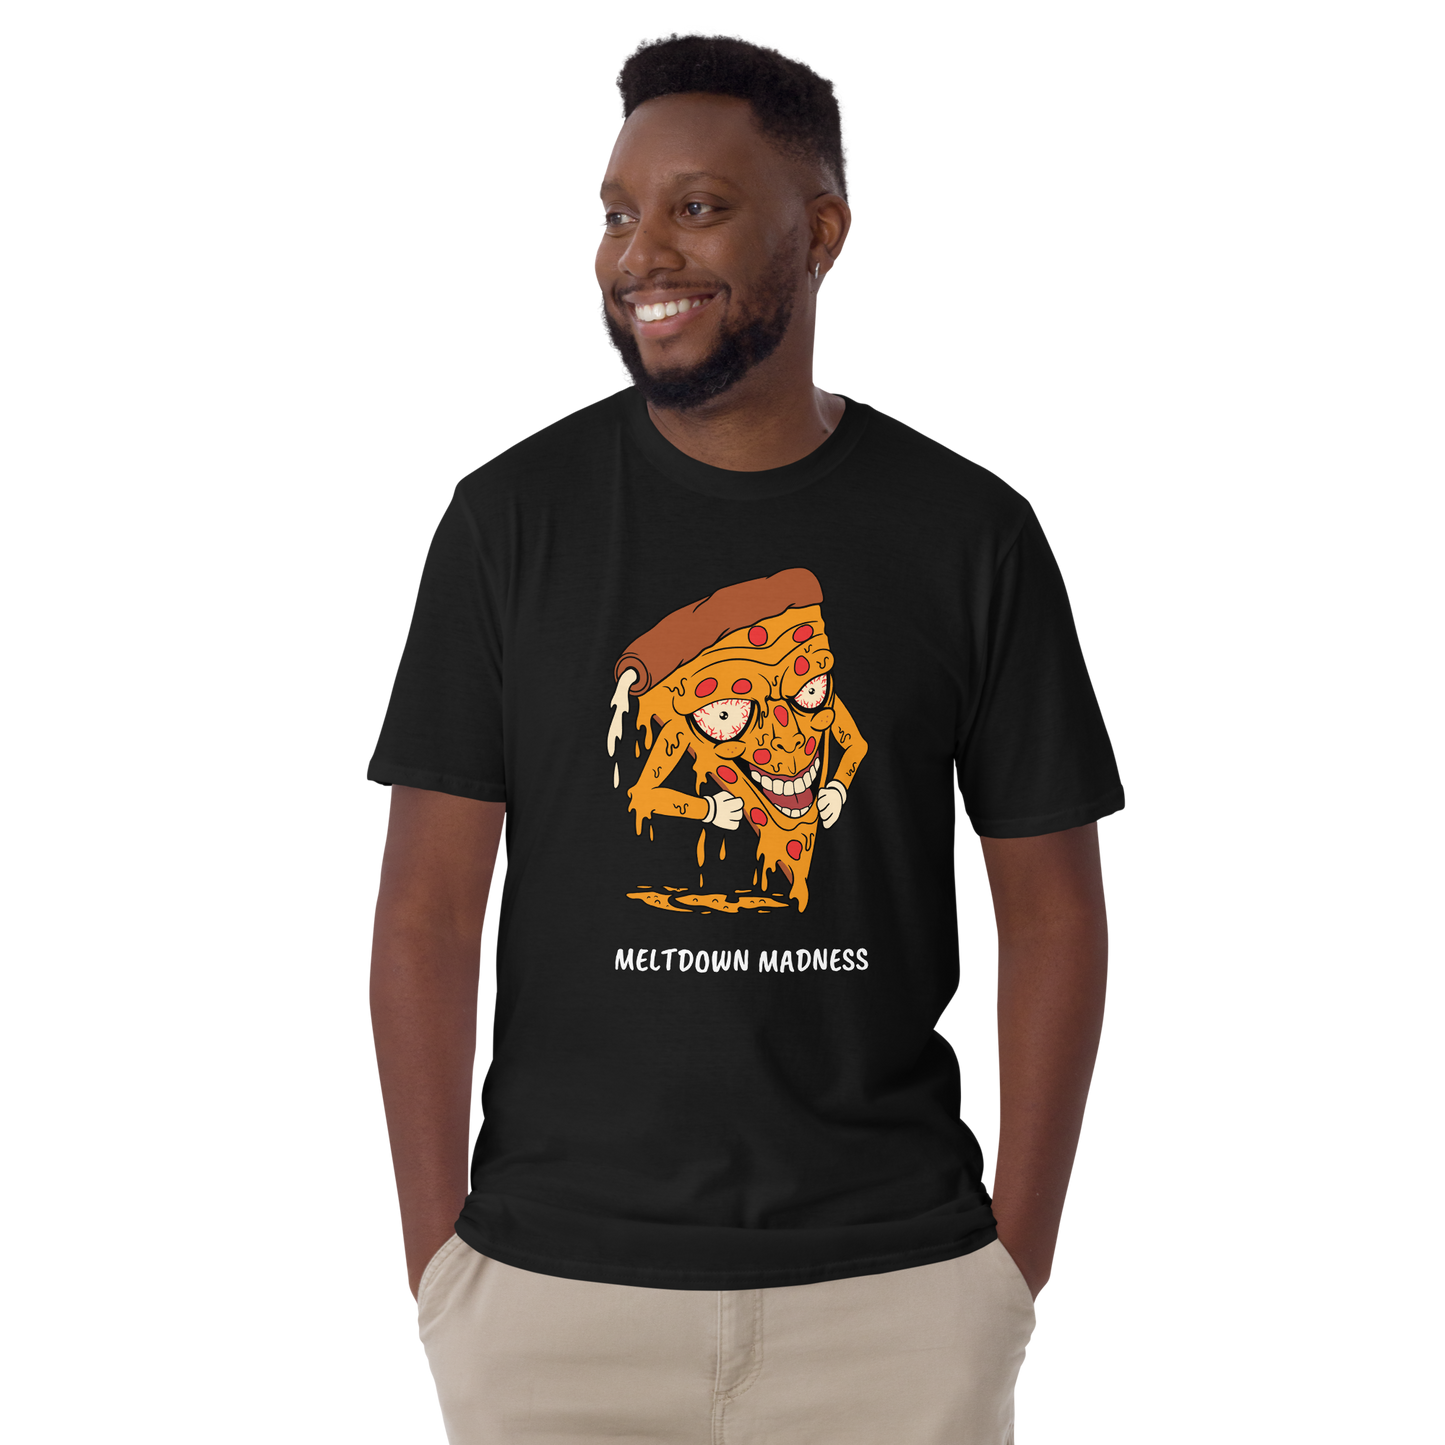 Smiling man wearing a Black Melting Pizza T-Shirt featuring the hilarious Meltdown Madness graphic on the chest - Funny Graphic Pizza T-Shirts - Boozy Fox